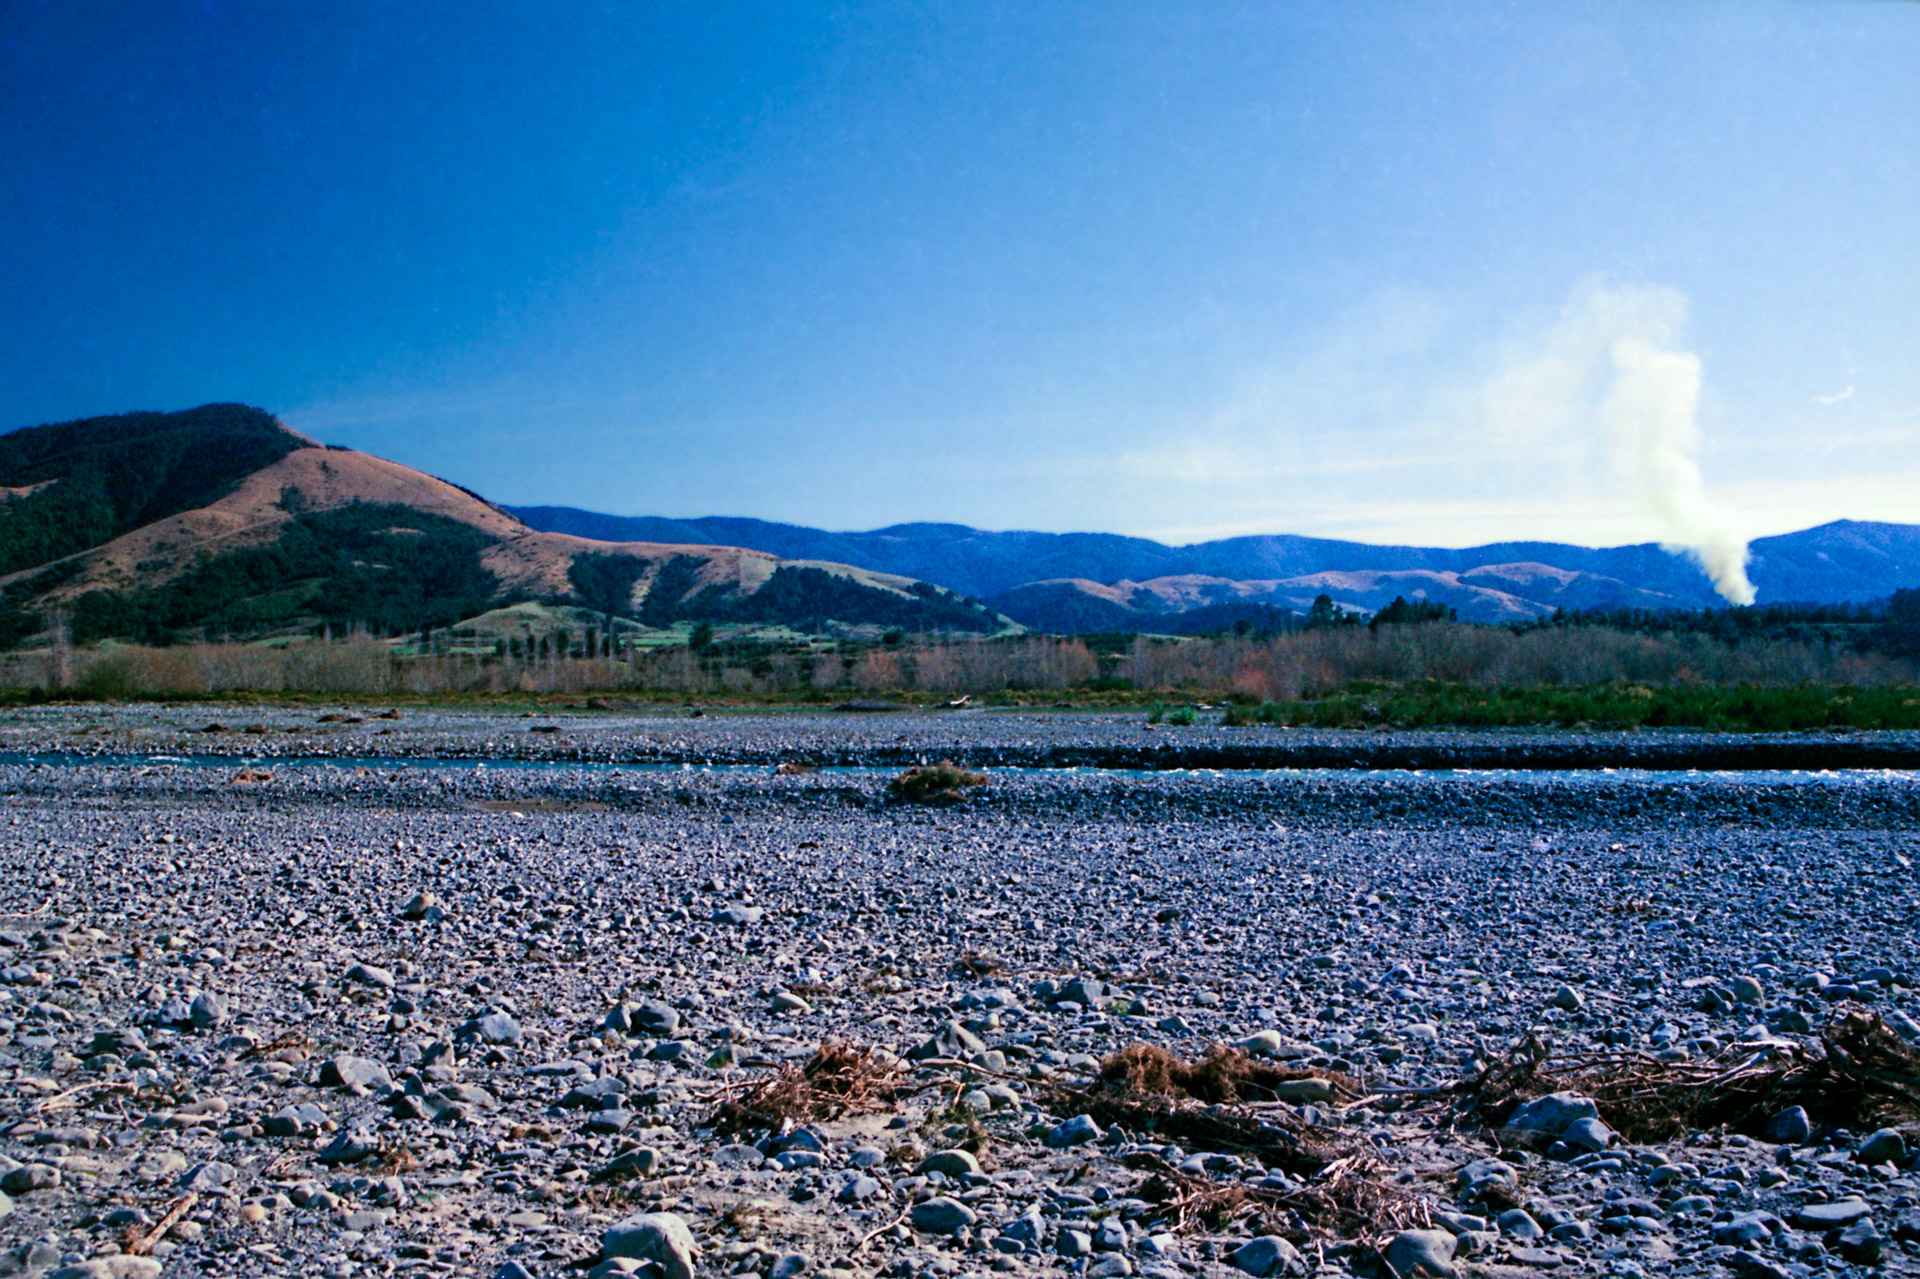 The river berm in 1988, relatively clear.